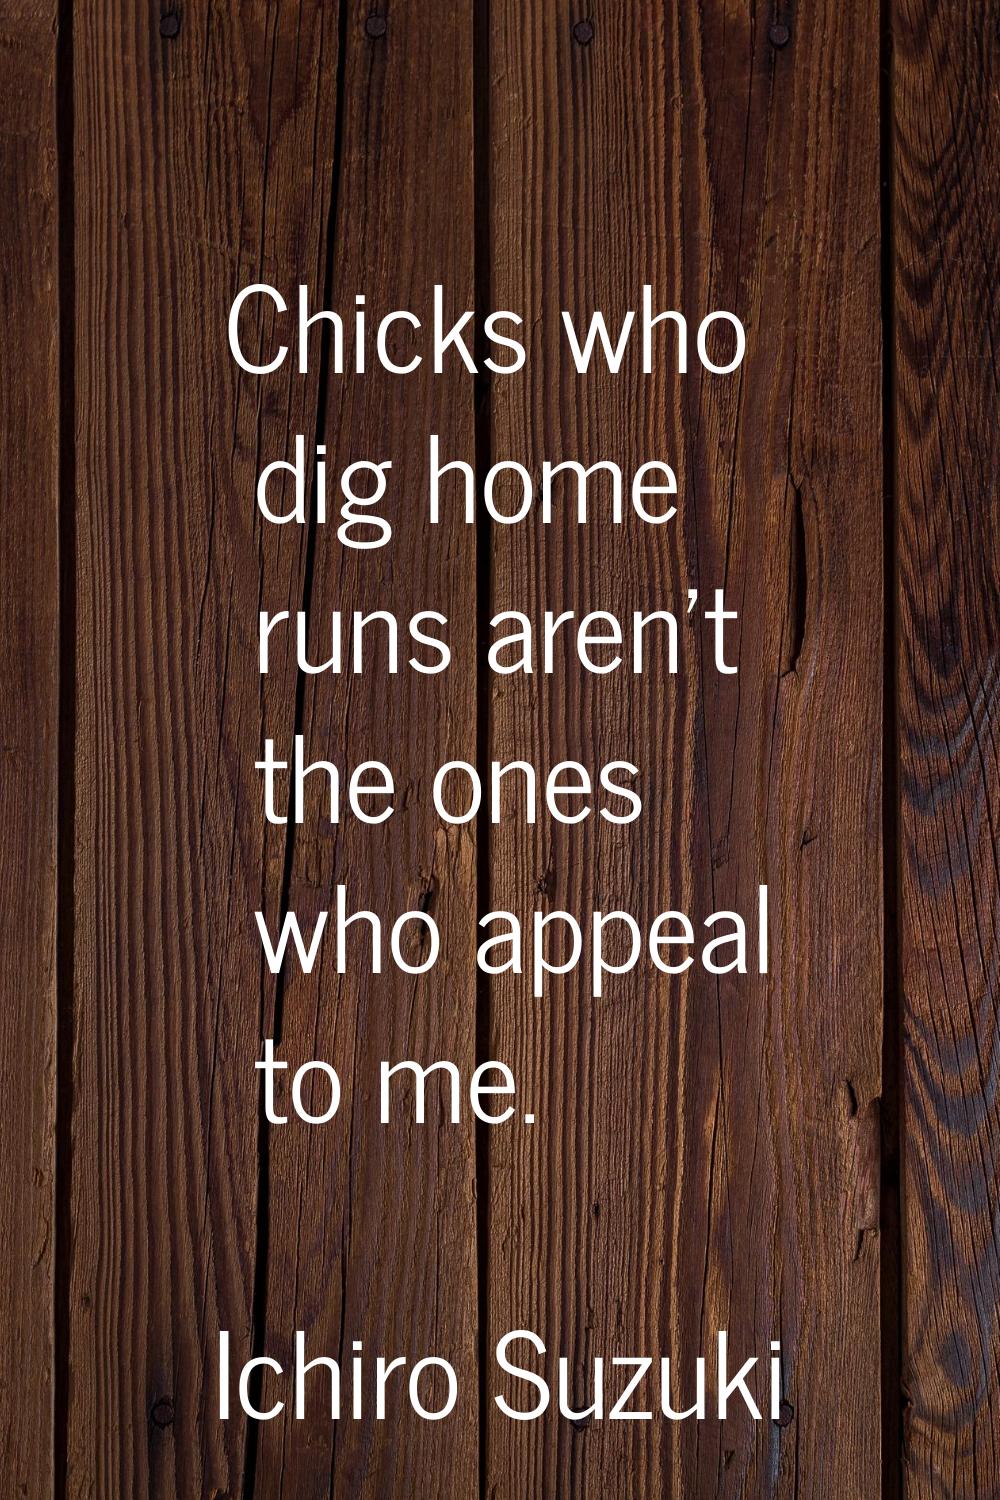 Chicks who dig home runs aren't the ones who appeal to me.